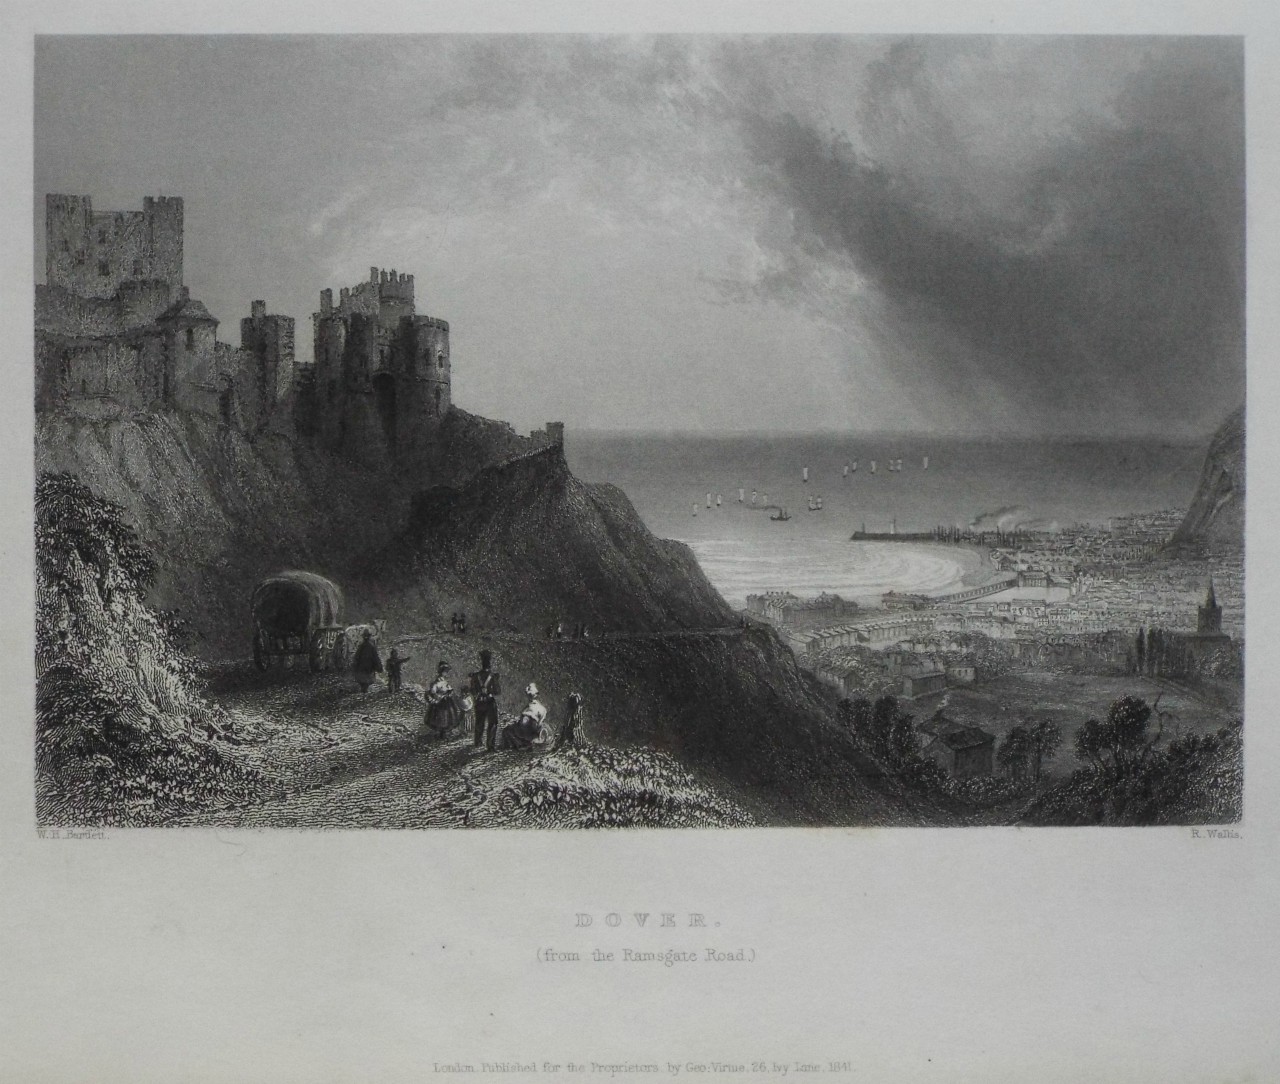 Print - Dover. (from the Ramsgate Road.) - Wallis